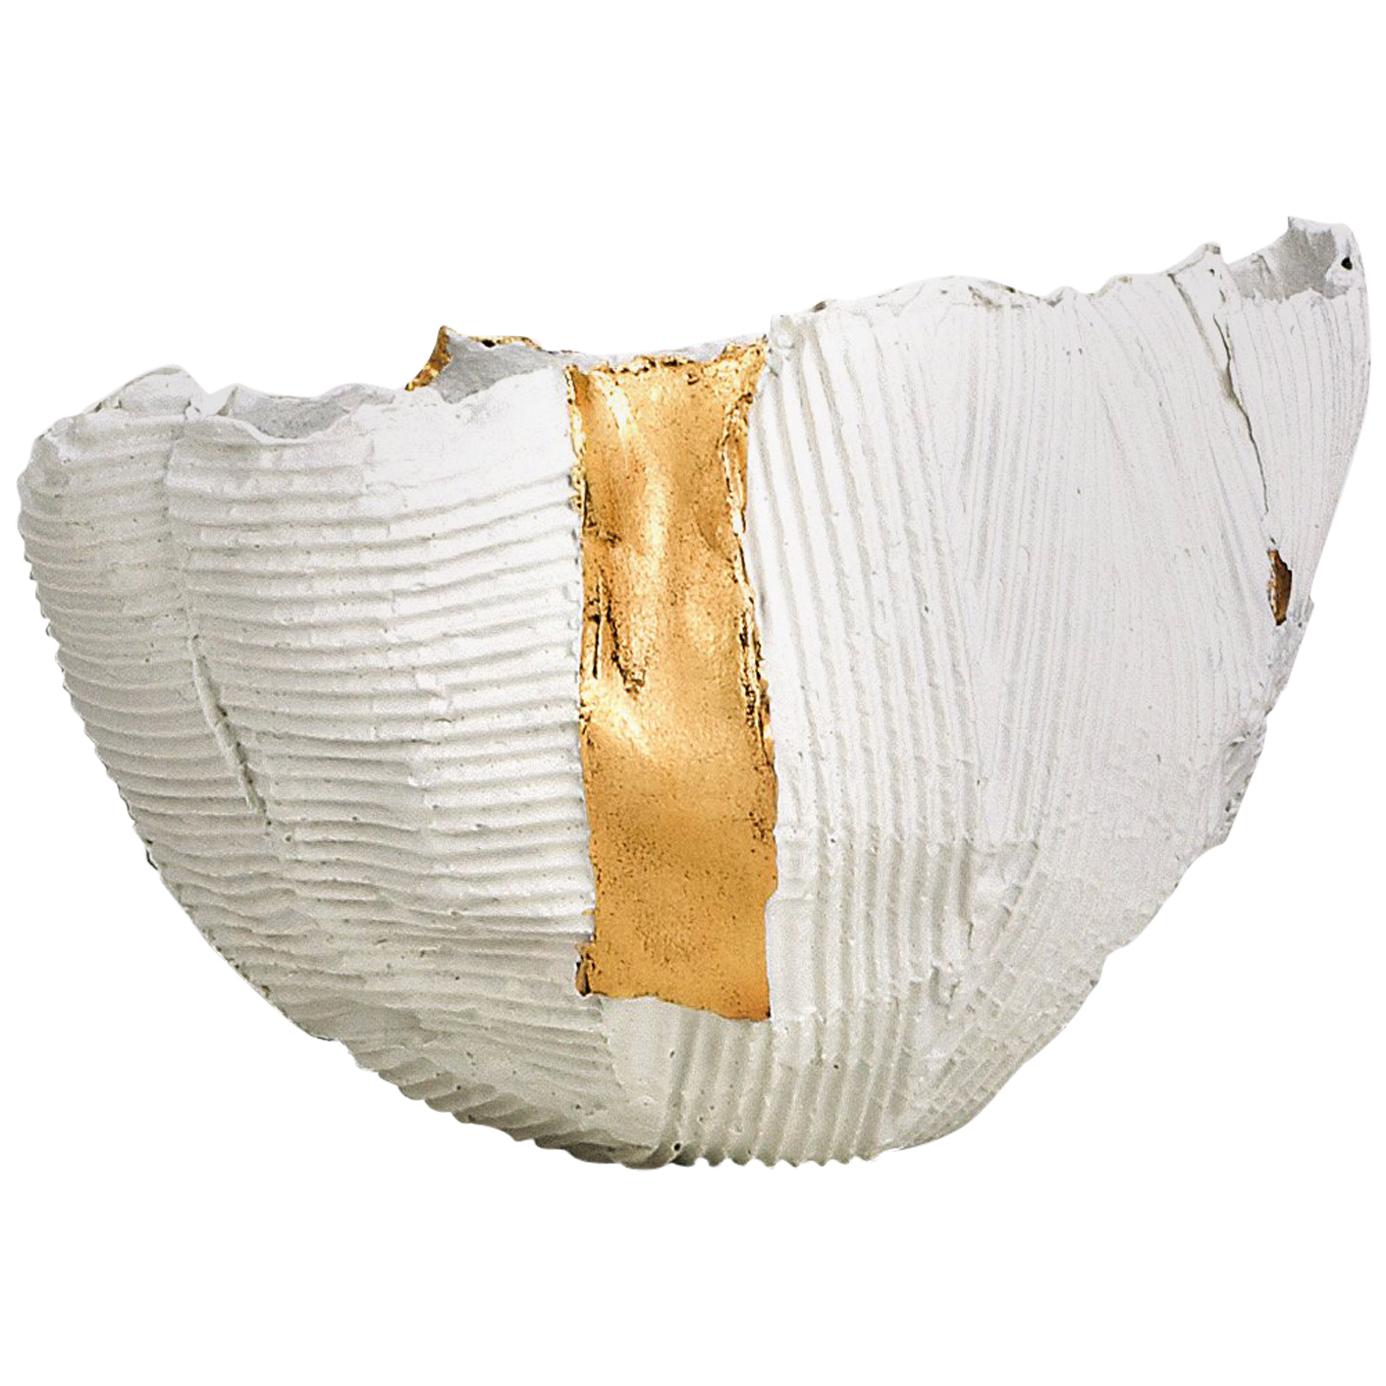 Contemporary Ceramic Cartocci Texture White and Gold Bowl #2 For Sale